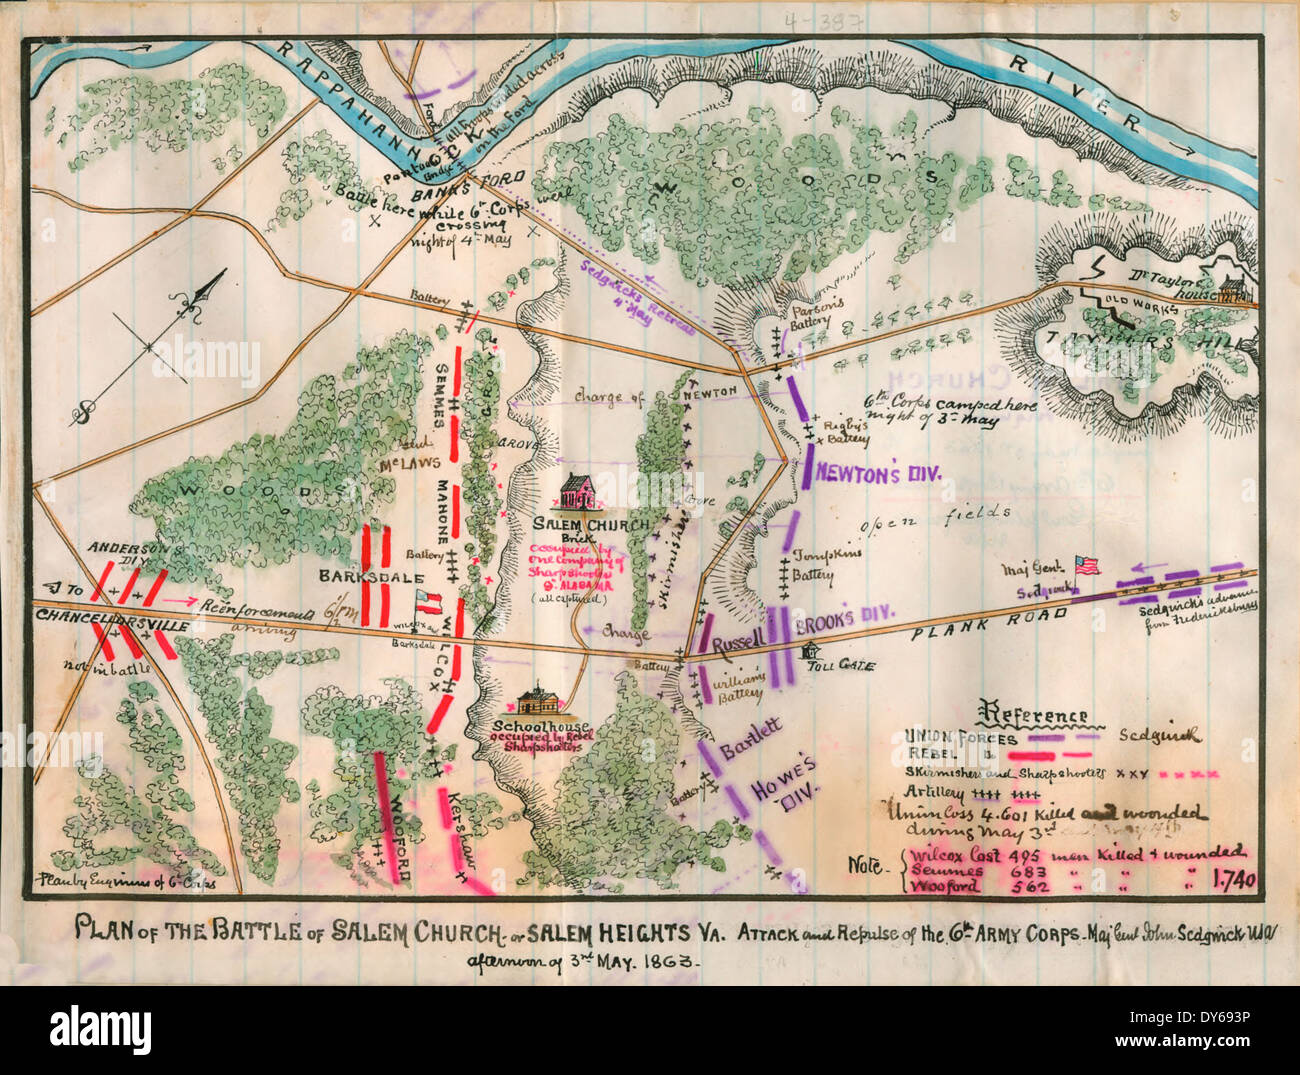 Plan of the battle of Salem Church or Salem Heights, Virginia Attack and repulse of the 6th Army Corps, Major General John Sedgwick, U.S.A., afternoon of 3rd May 1863. USA Civil War Stock Photo